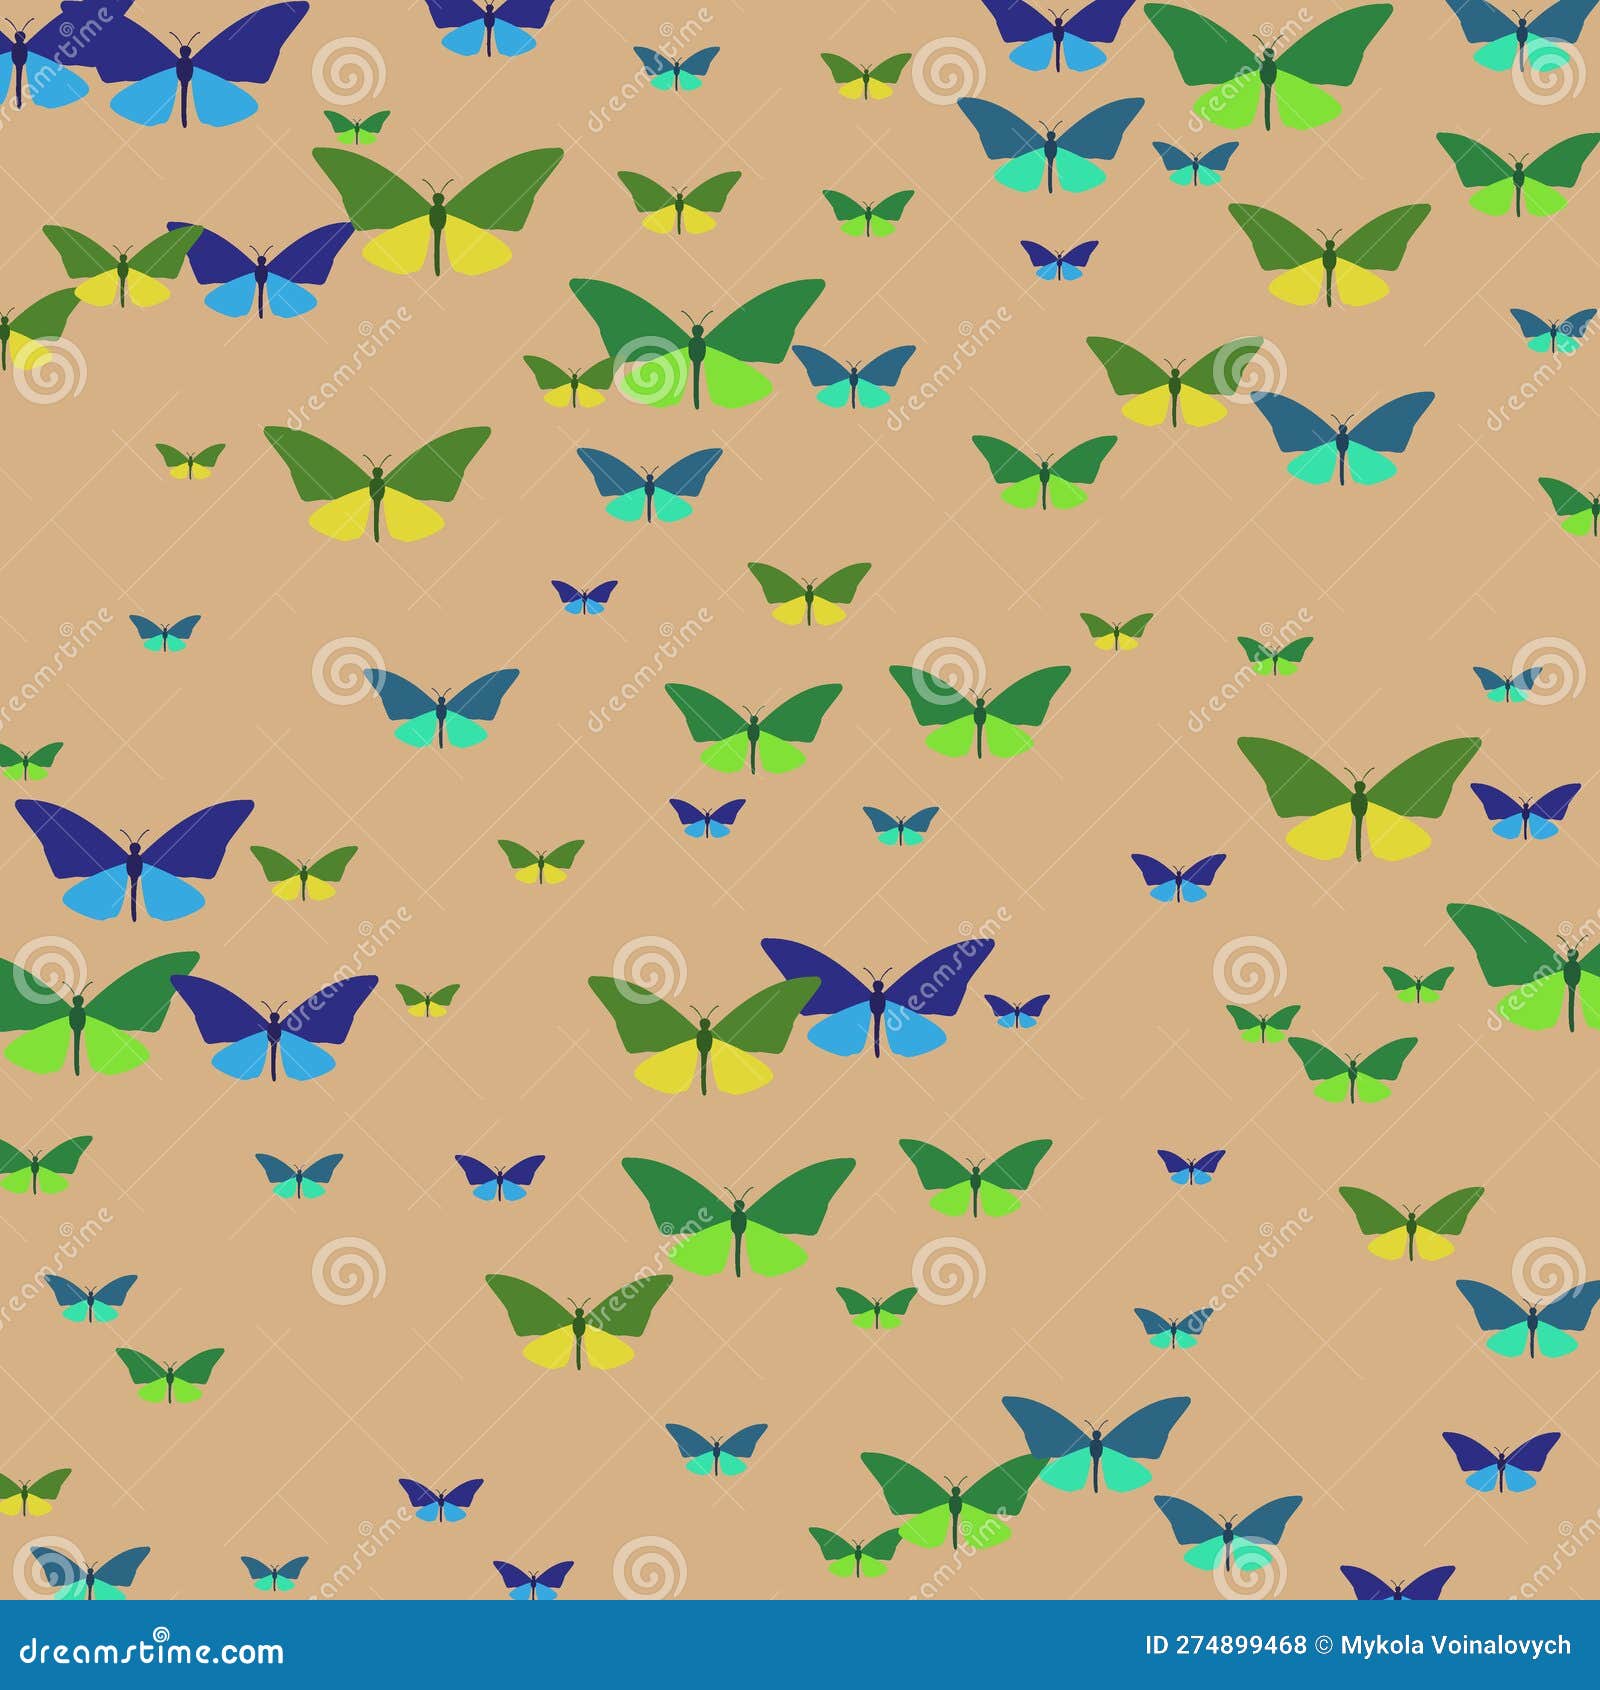 Poster Design with Colorful Butterflies Vector Background, Brochure ...